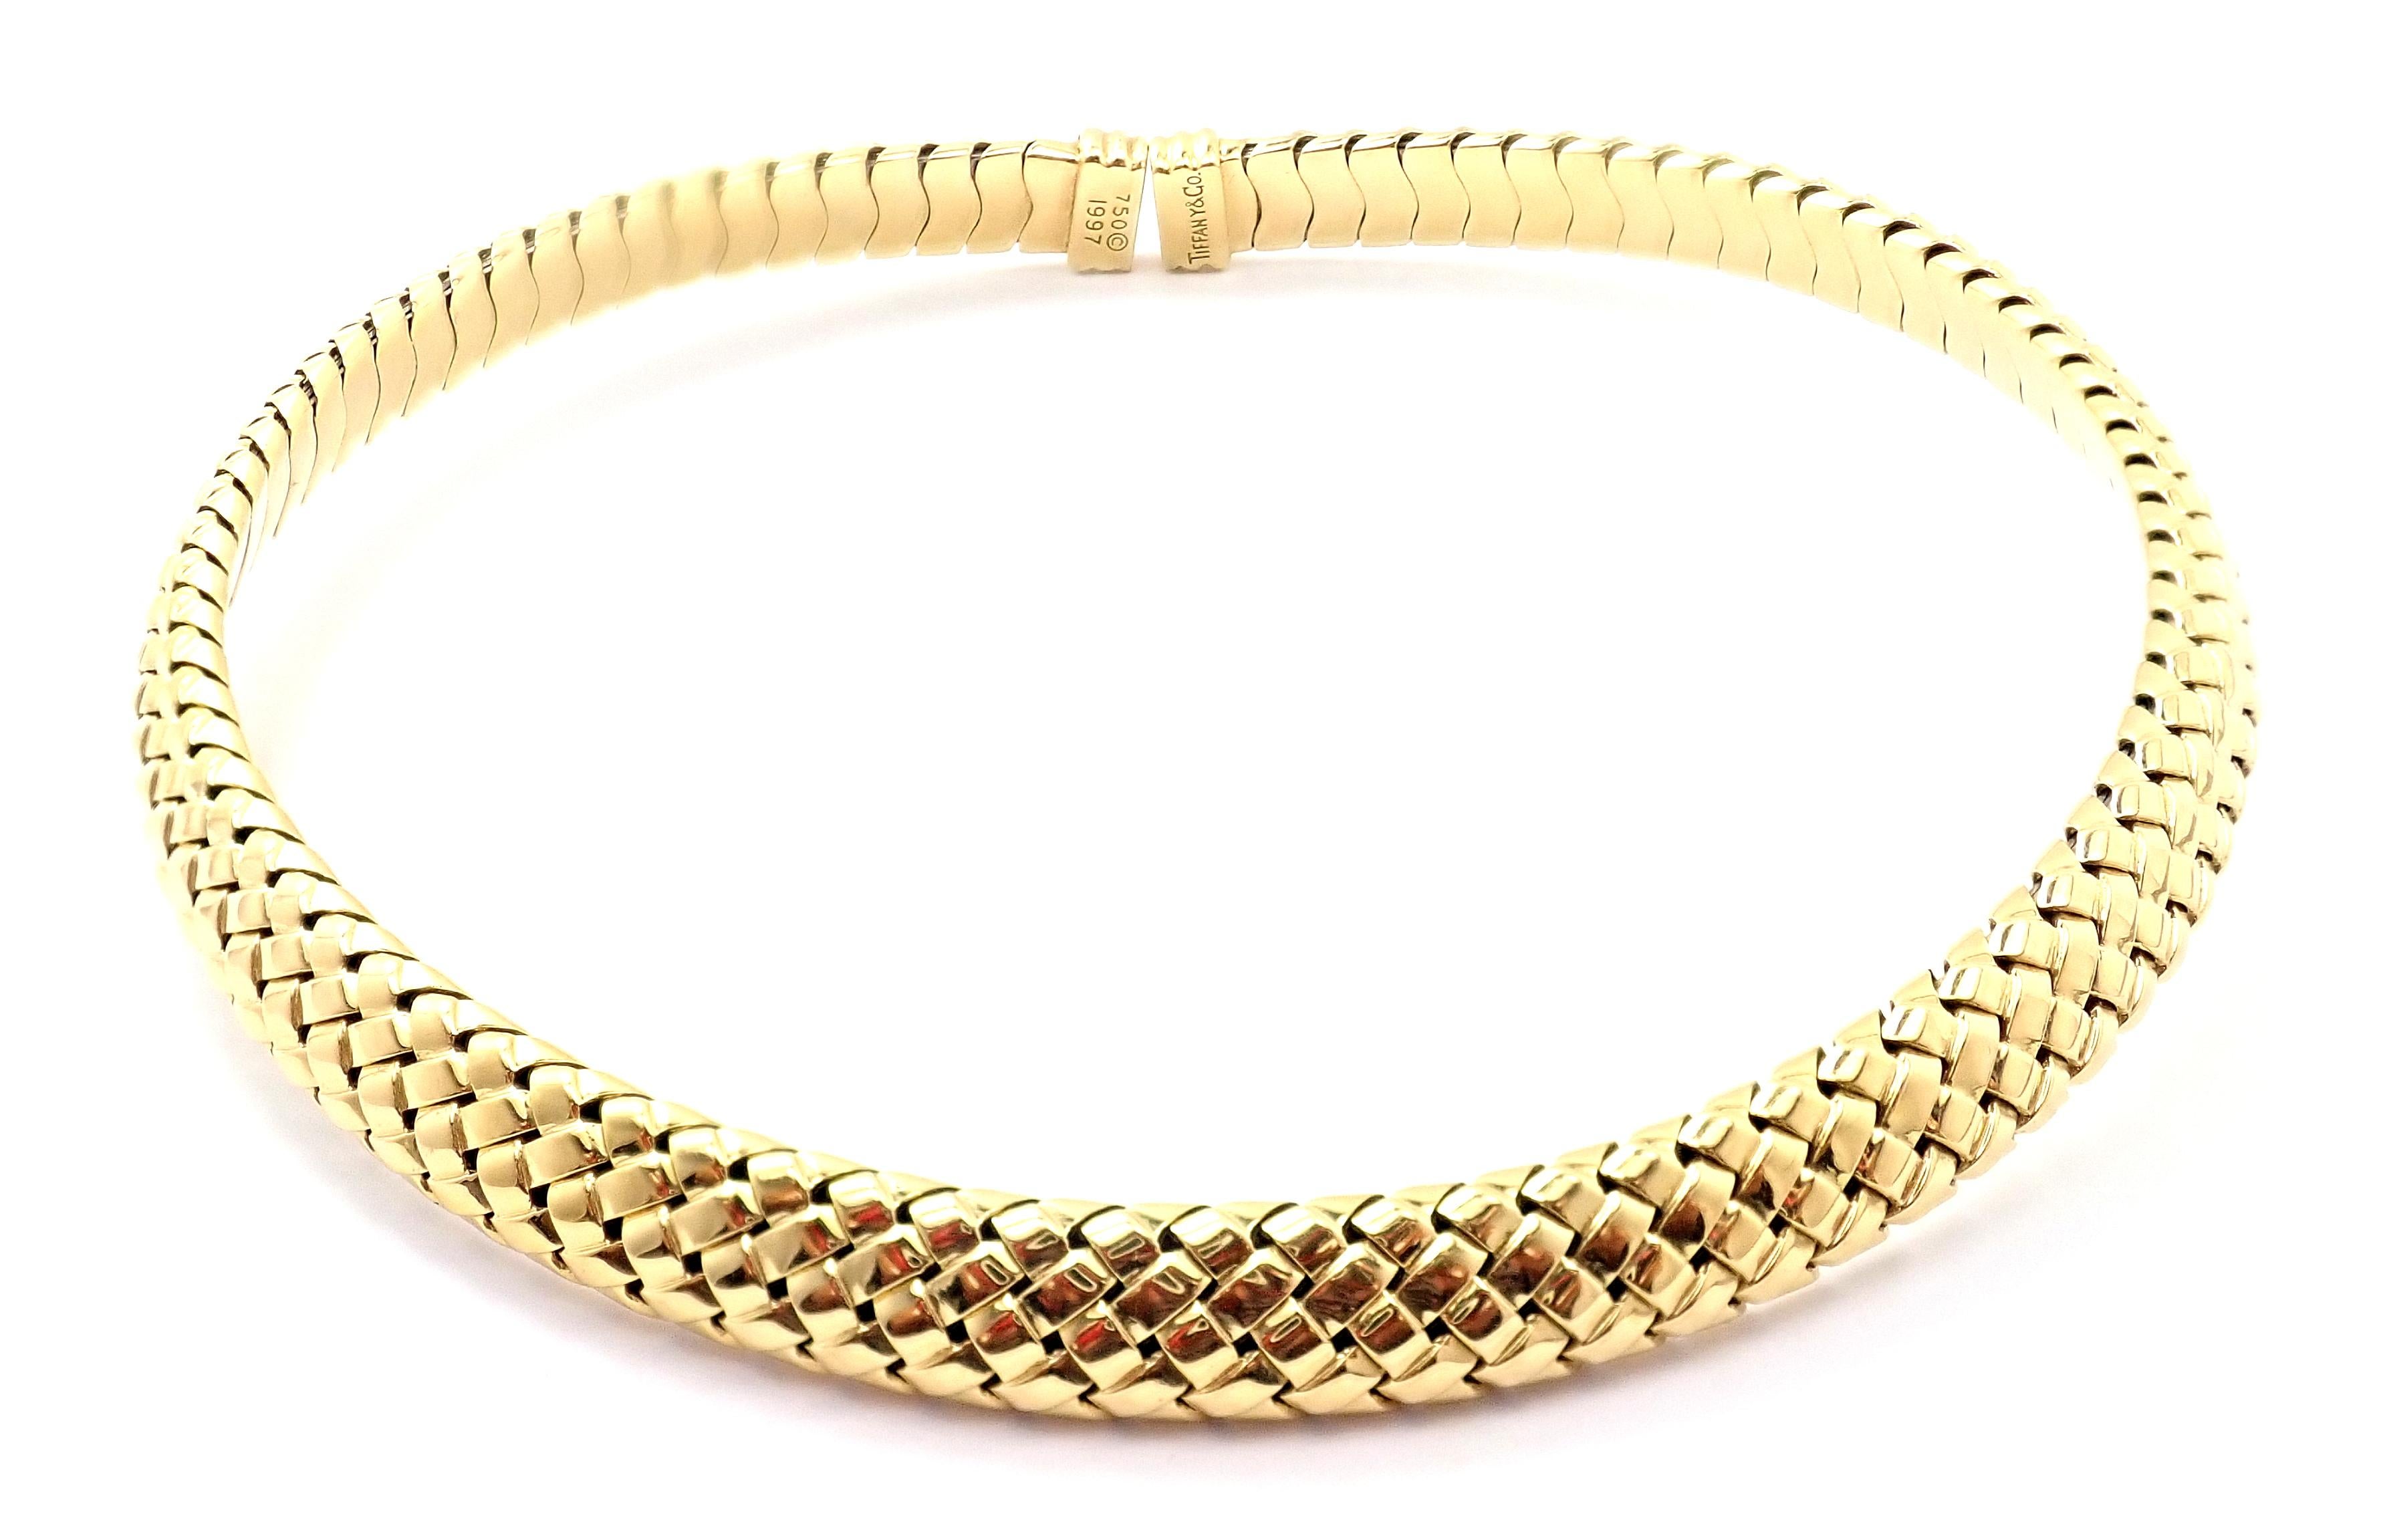 18k Yellow Gold Vintage Vannerie Basket Weave Choker Necklace by Tiffany & Co.
Details:
Weight: 89.2 grams
Dimensions: 10mm
Stamped Hallmarks: Tiffany &Co, 750, 1997
*Free Shipping within the United States*
YOUR PRICE: $10,500
T2979rhte